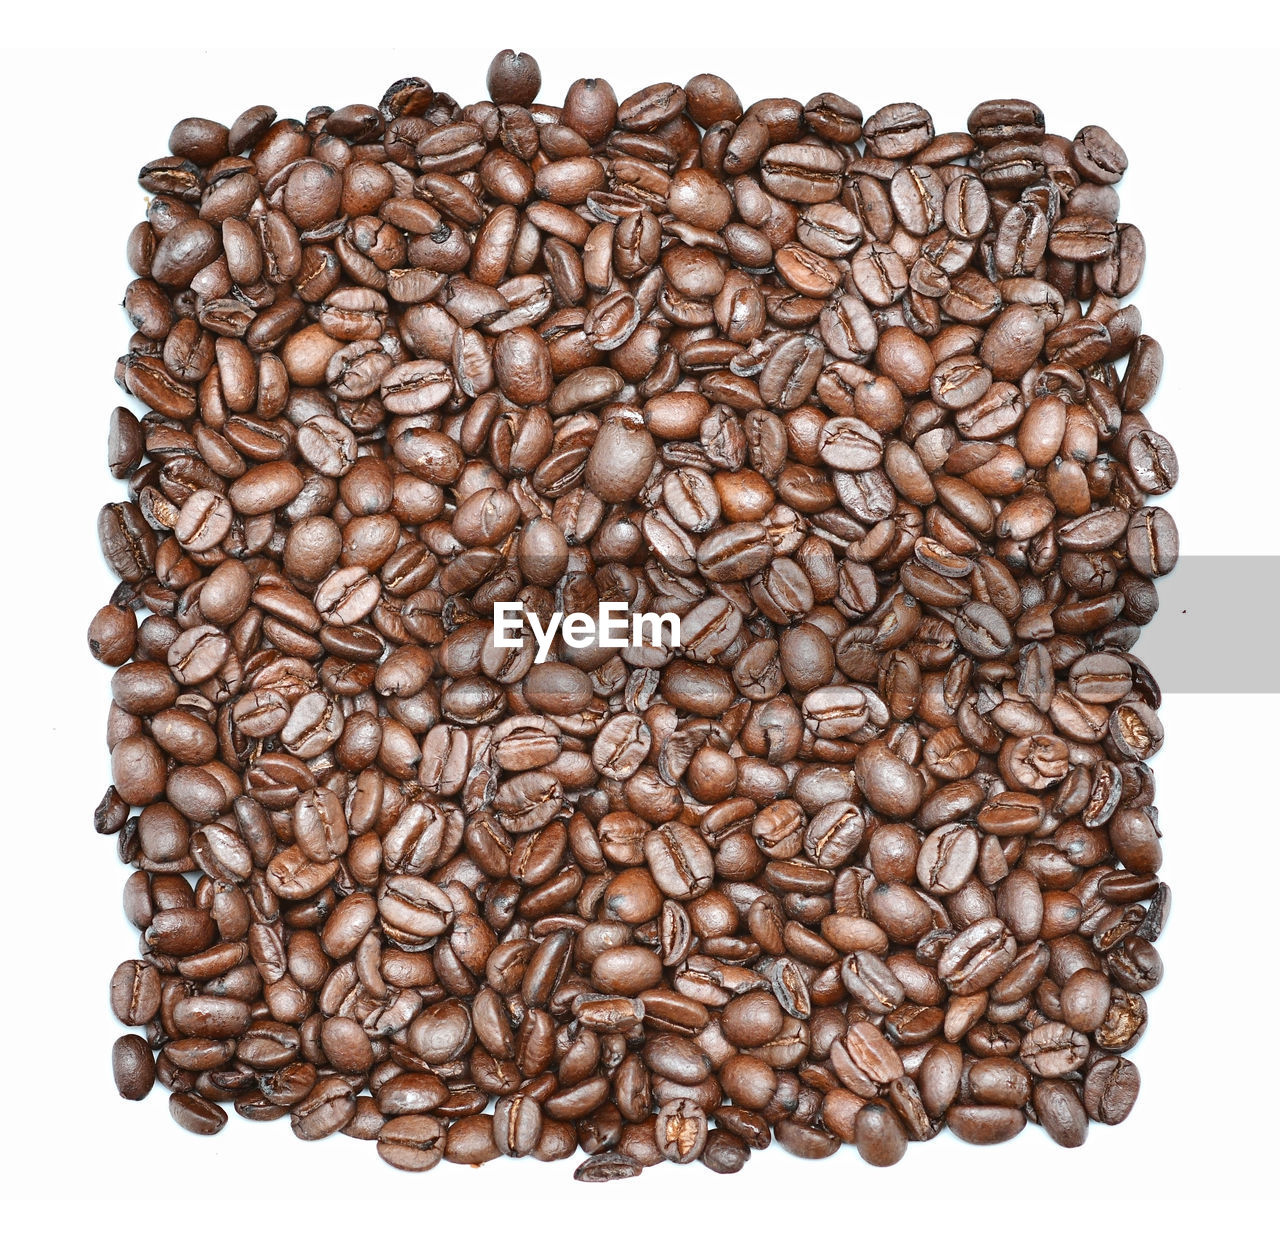 Roasted coffee beans background or wallpaper. a stimulant contains caffeine and is a tasty drink